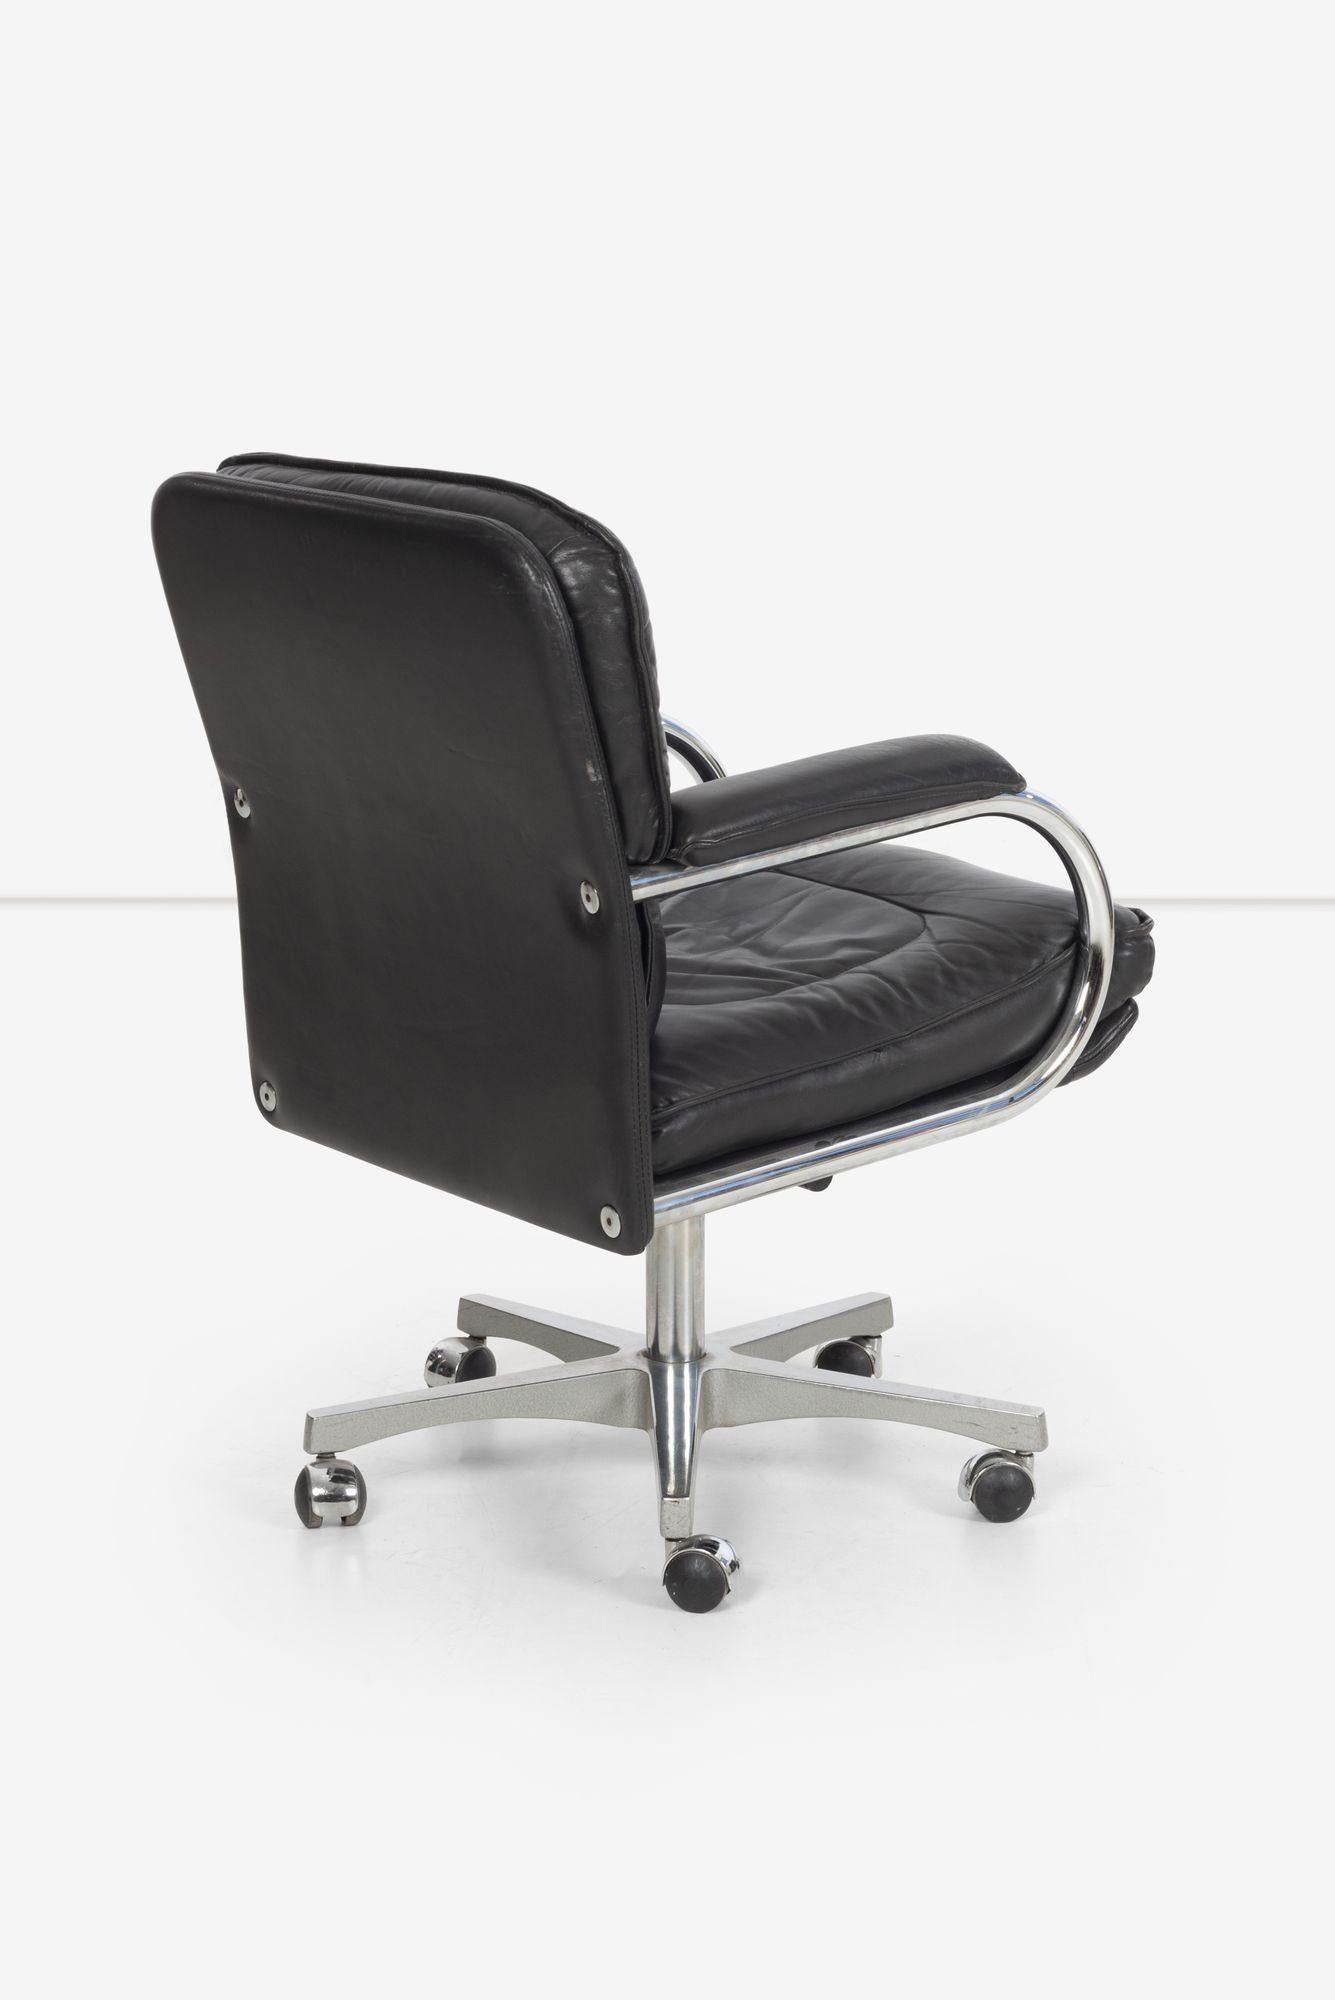 Modern Frank Mariani Leather Desk Chair For Sale